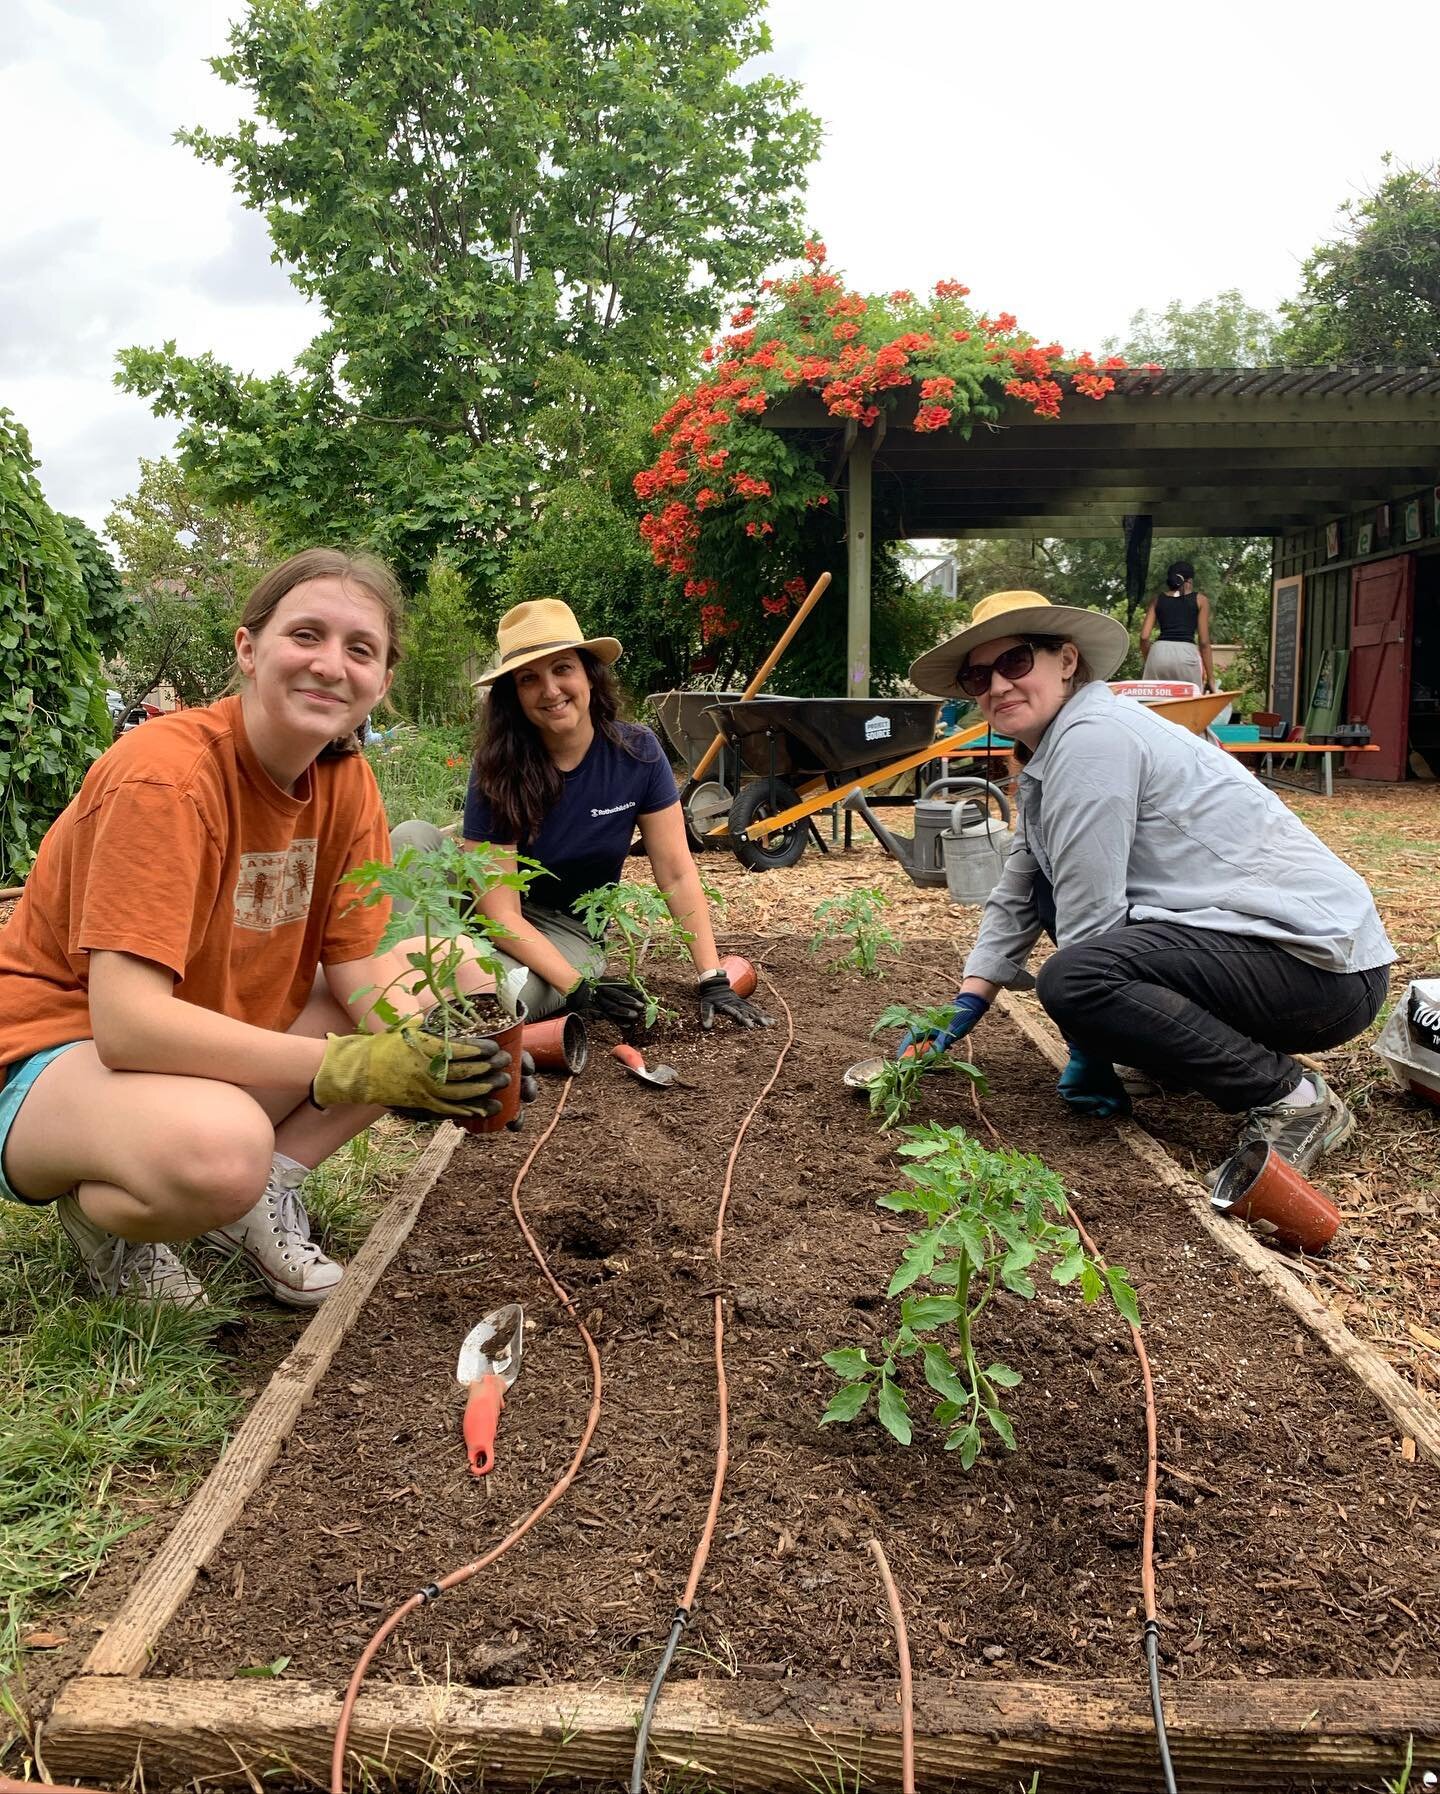 Big thanks to all the volunteers who helped out at Saturday&rsquo;s Community Garden Day at 24th Street!! We cleared and planted four beds with basil, cucumbers, eggplant, and more!! This summer our school gardens are open for volunteers! Together we